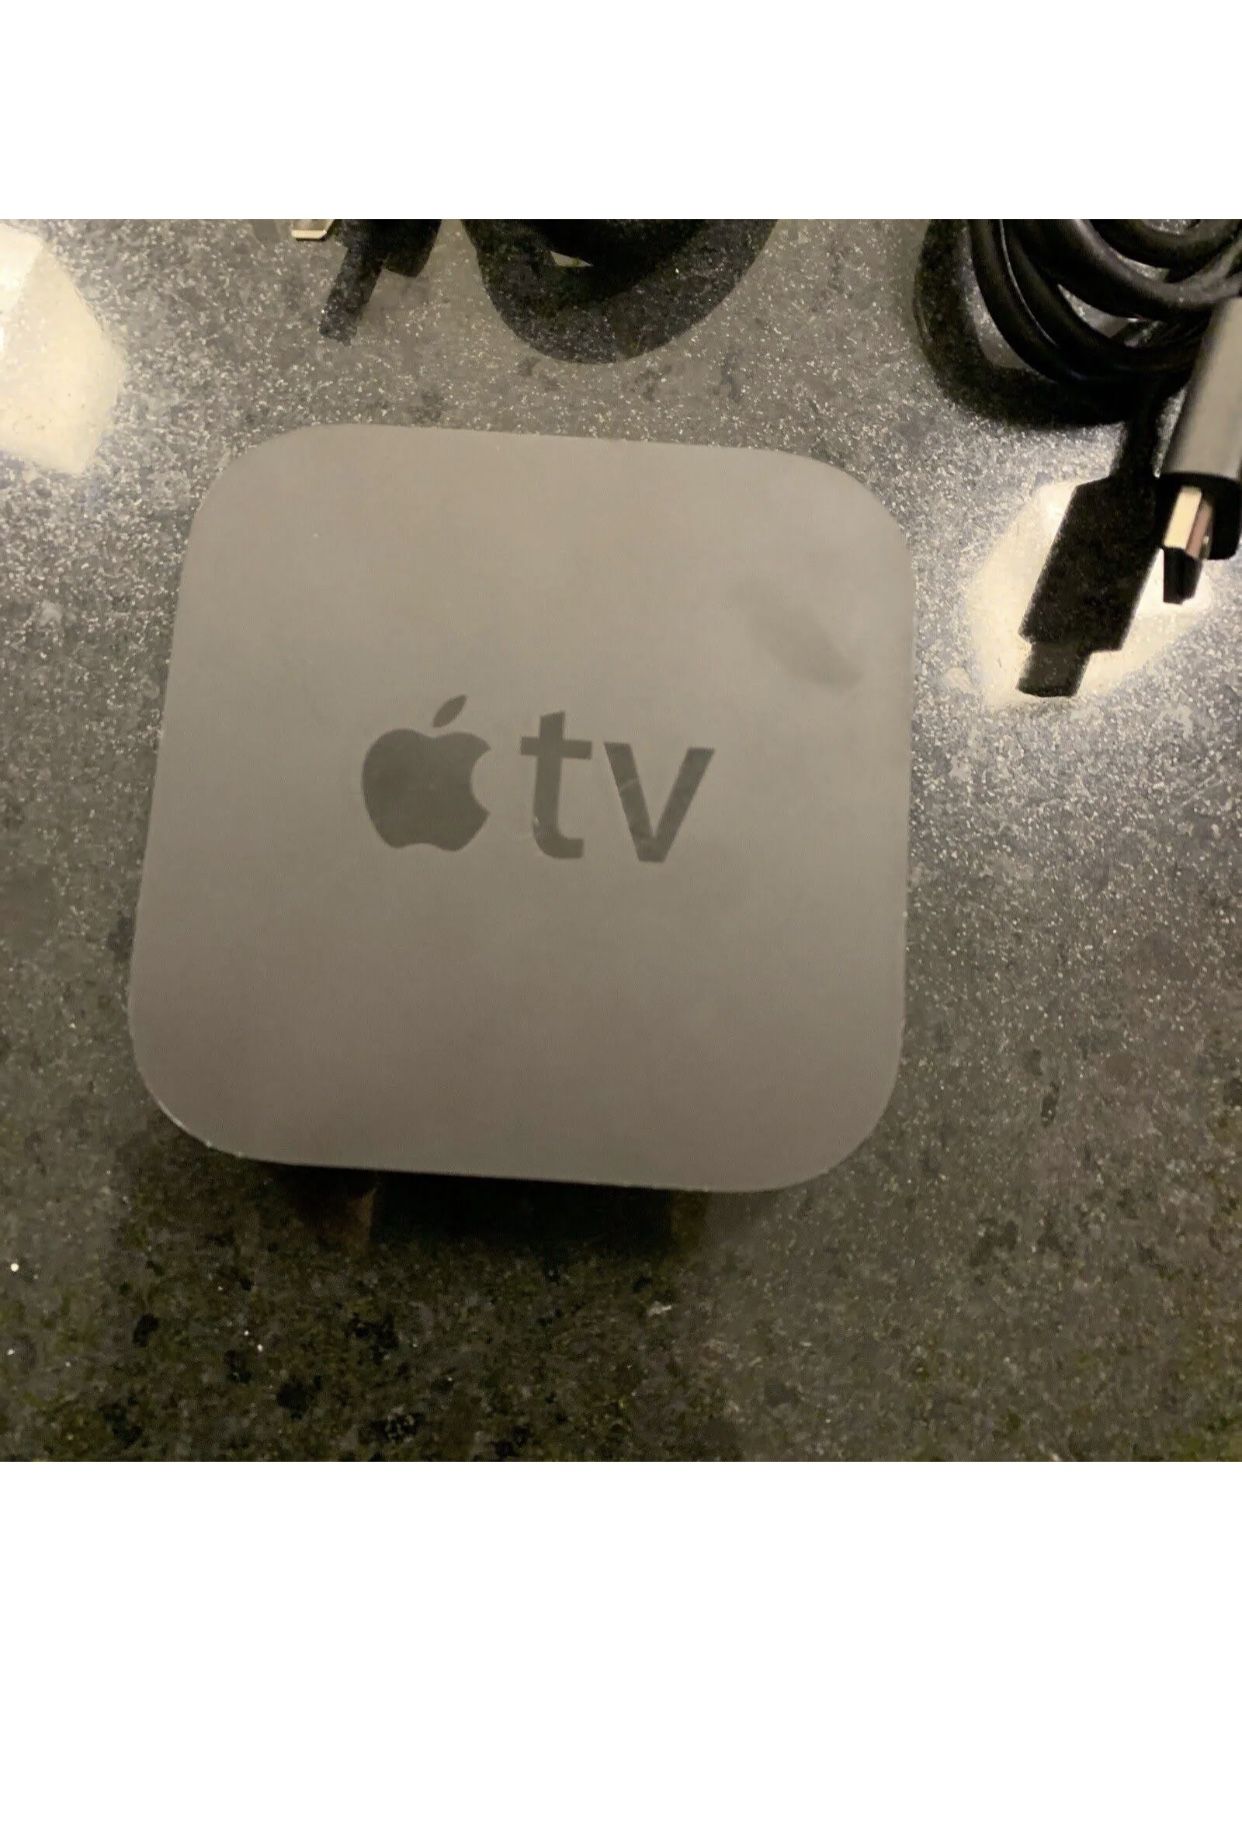 Apple Tv 3rd Generation A1469 Media Streaming Device -no Remote